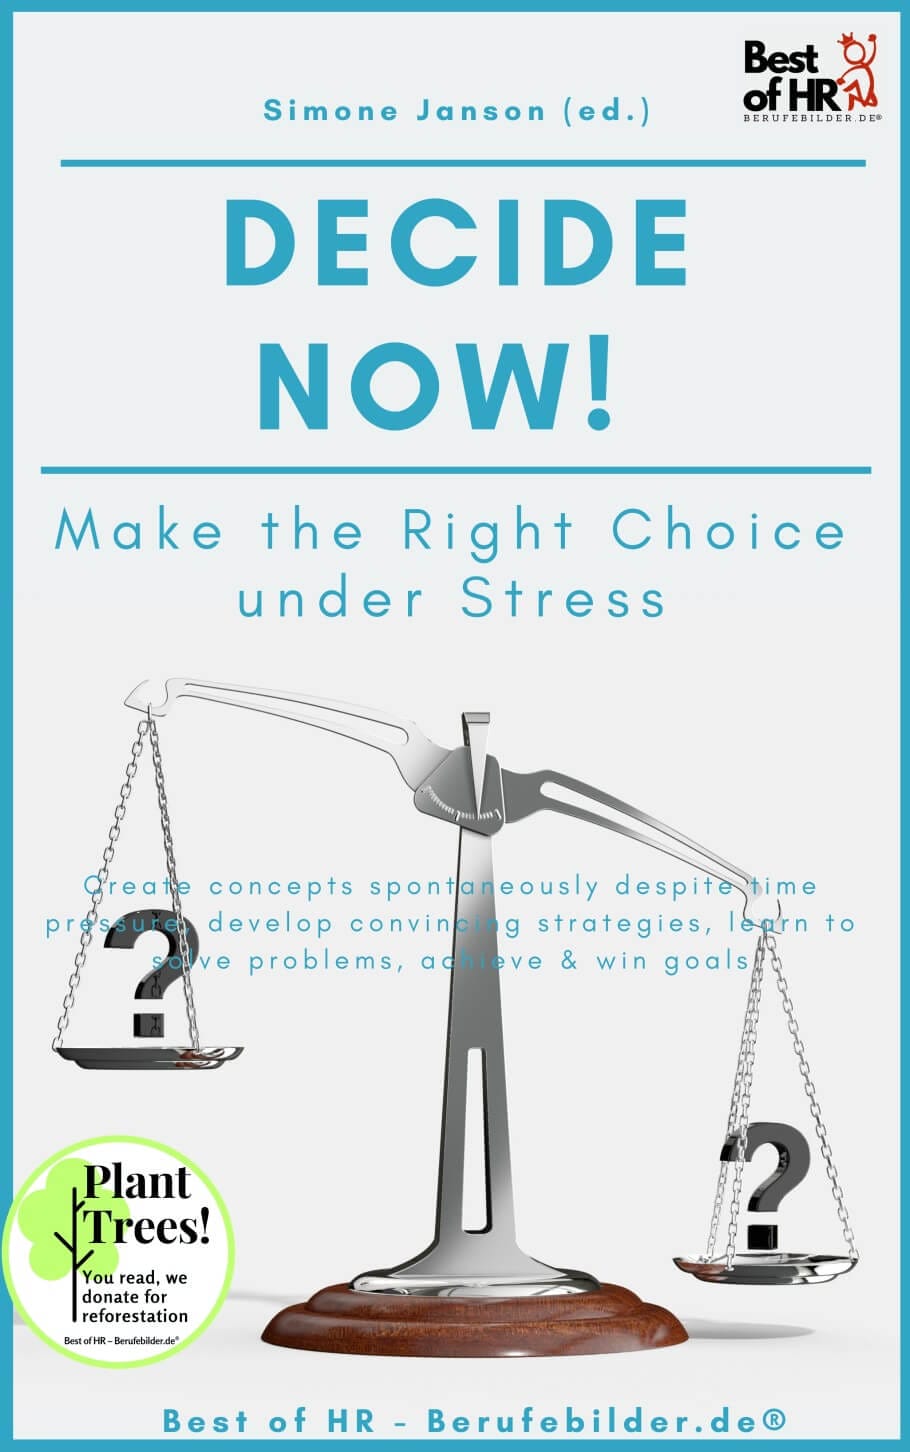 Decide now! Make the Right Choice under Stress (Engl. Version) [Digital]